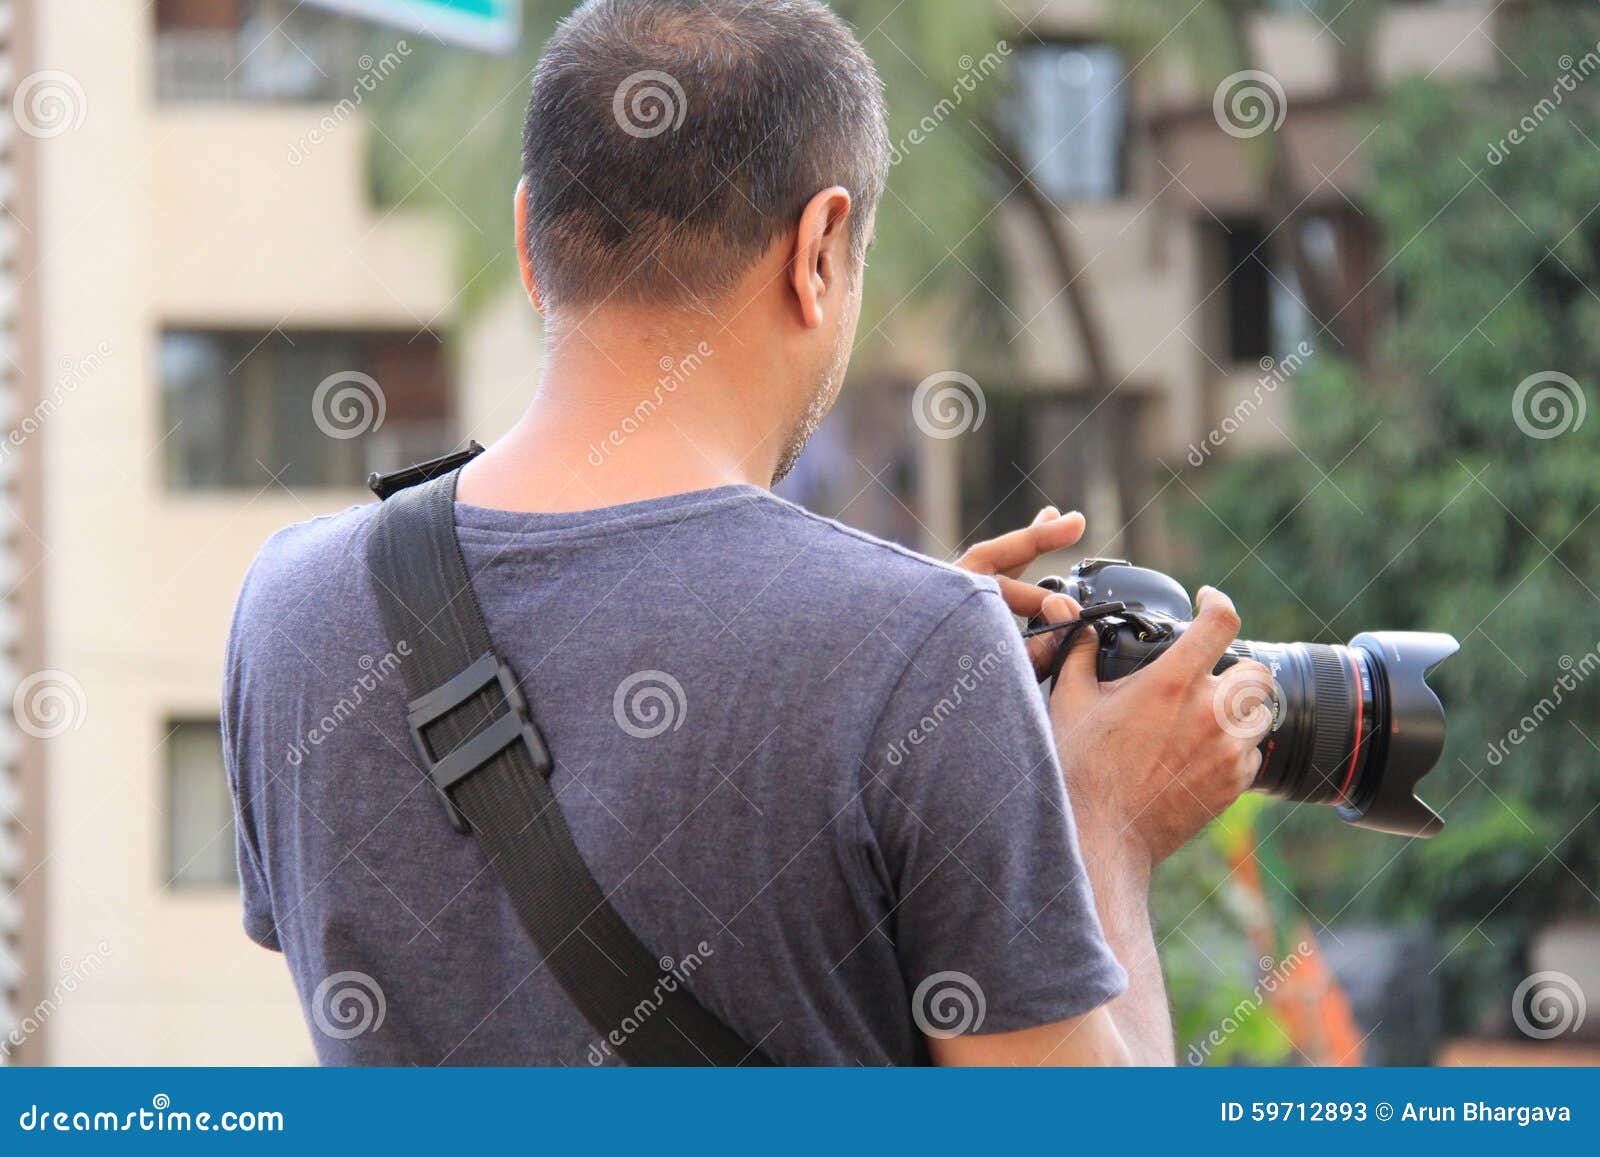 photographer on assignment